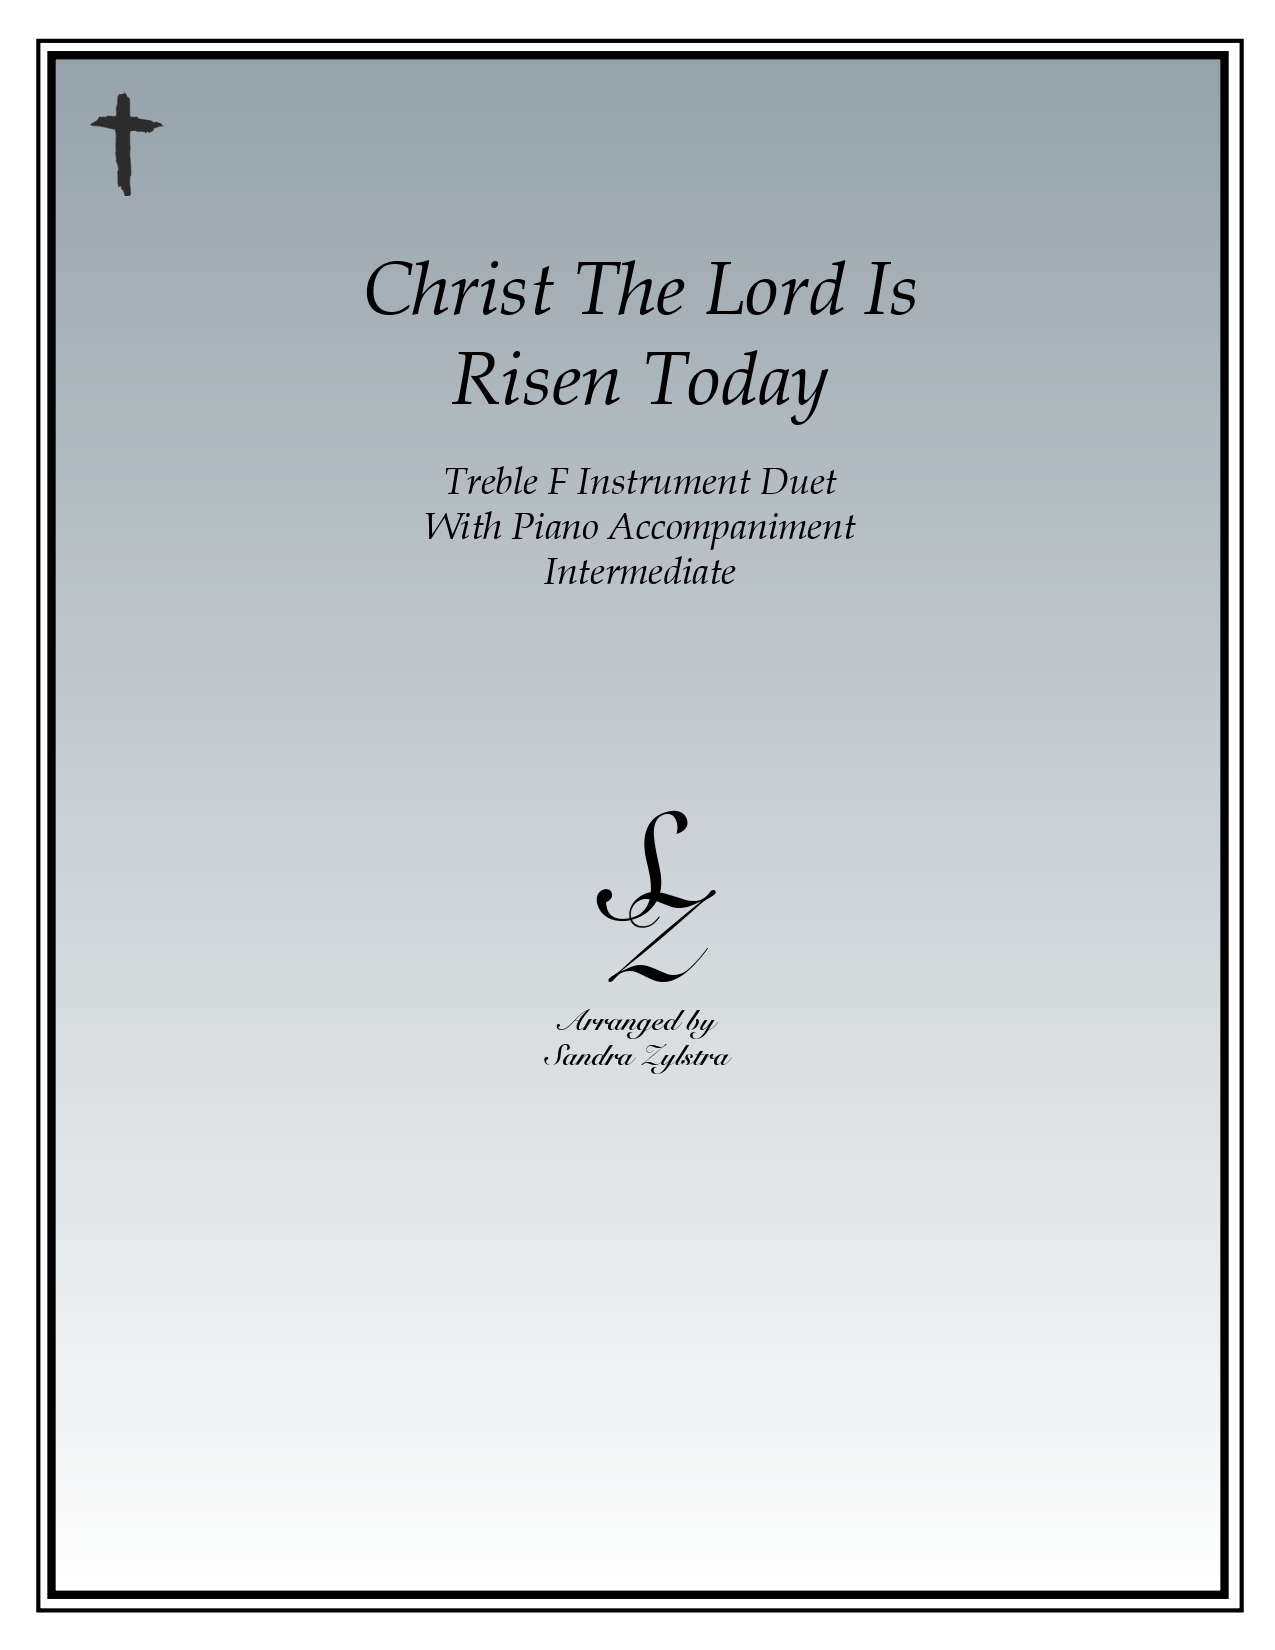 Christ The Lord Is Risen Today F instrument duet parts cover page 00011